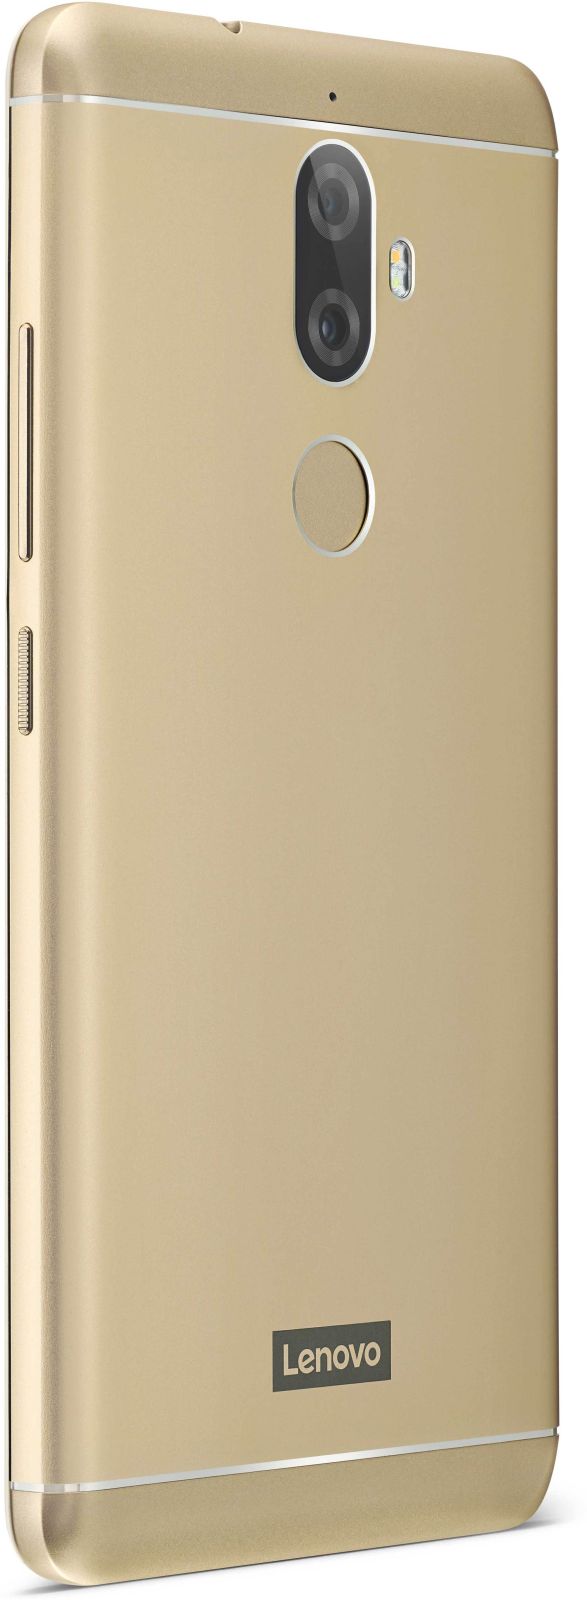 lenovo k8 plus launched in india: know its specifications, price and availability